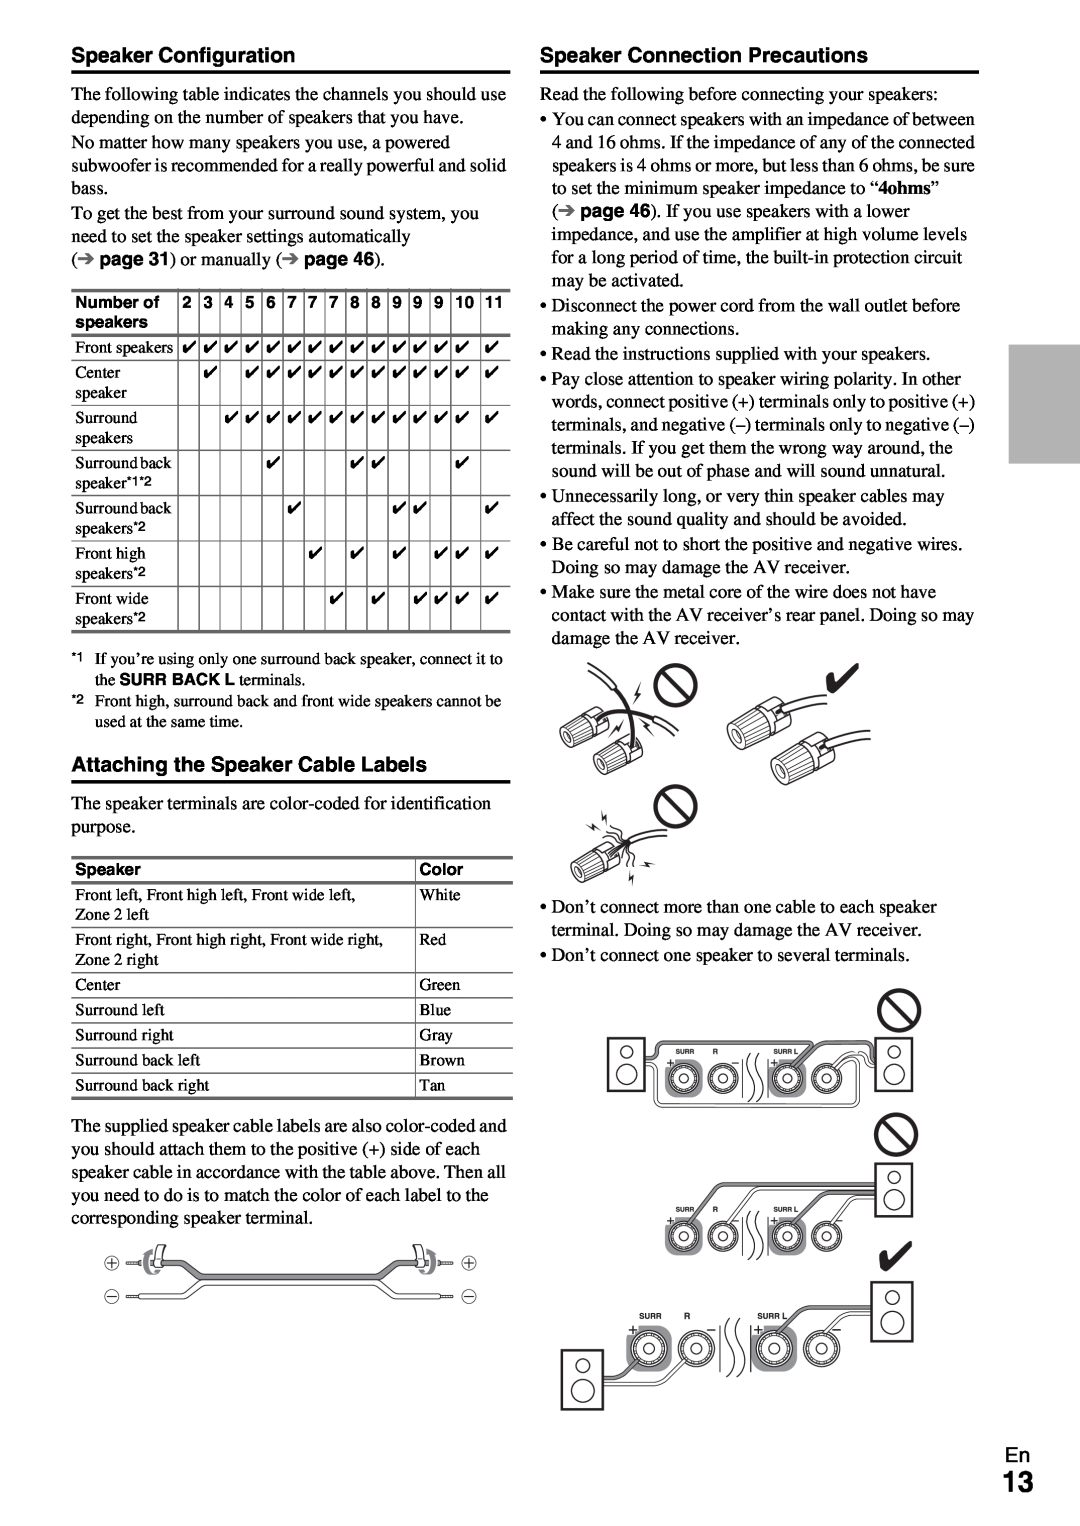 Onkyo HT-RC370 instruction manual Speaker Configuration, Attaching the Speaker Cable Labels, Speaker Connection Precautions 